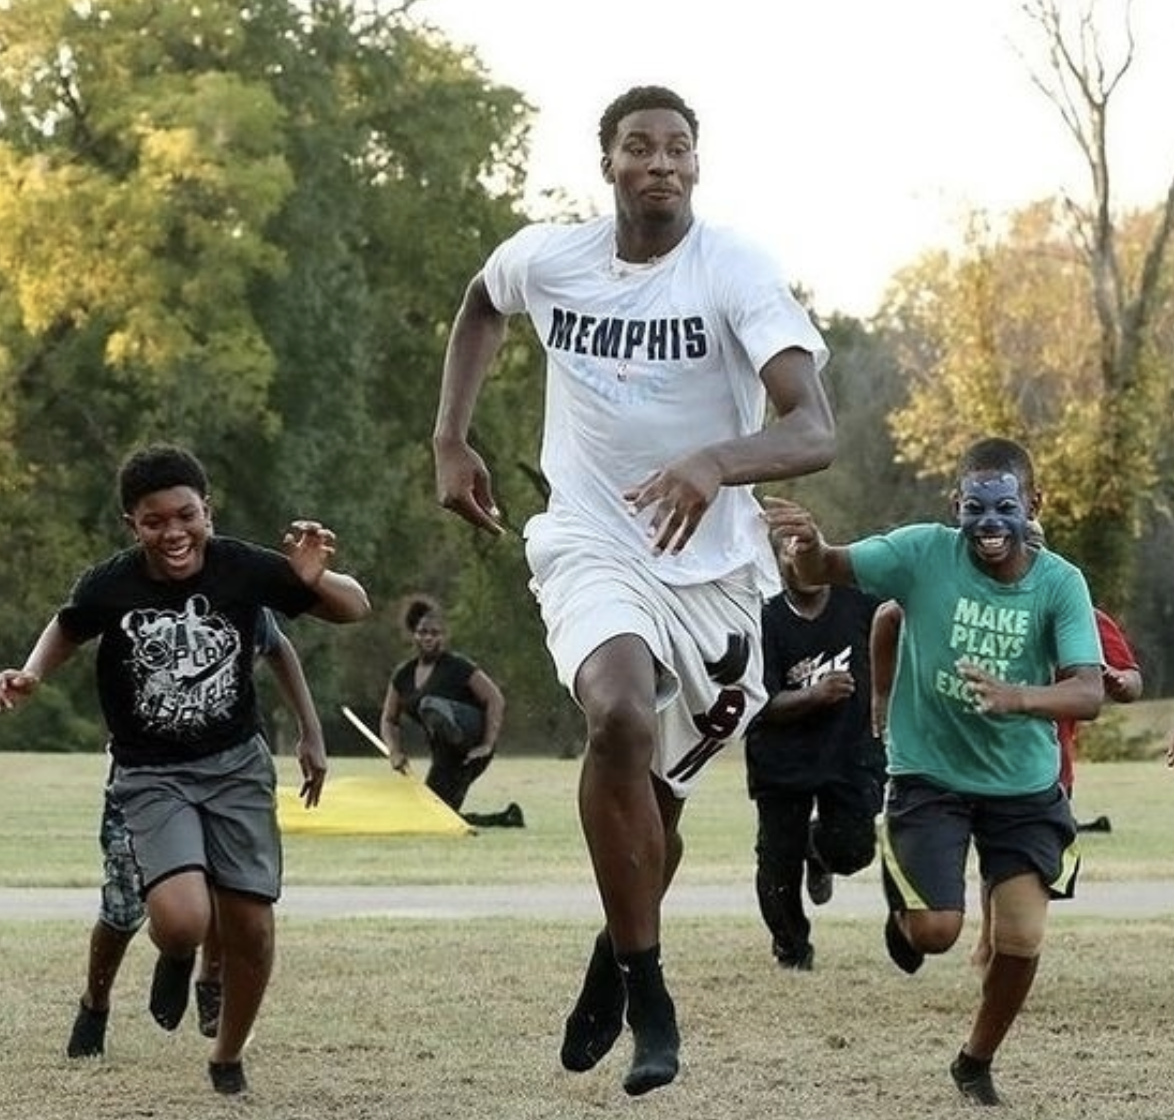 A group of young men participating in a mentoring program while running in a park.